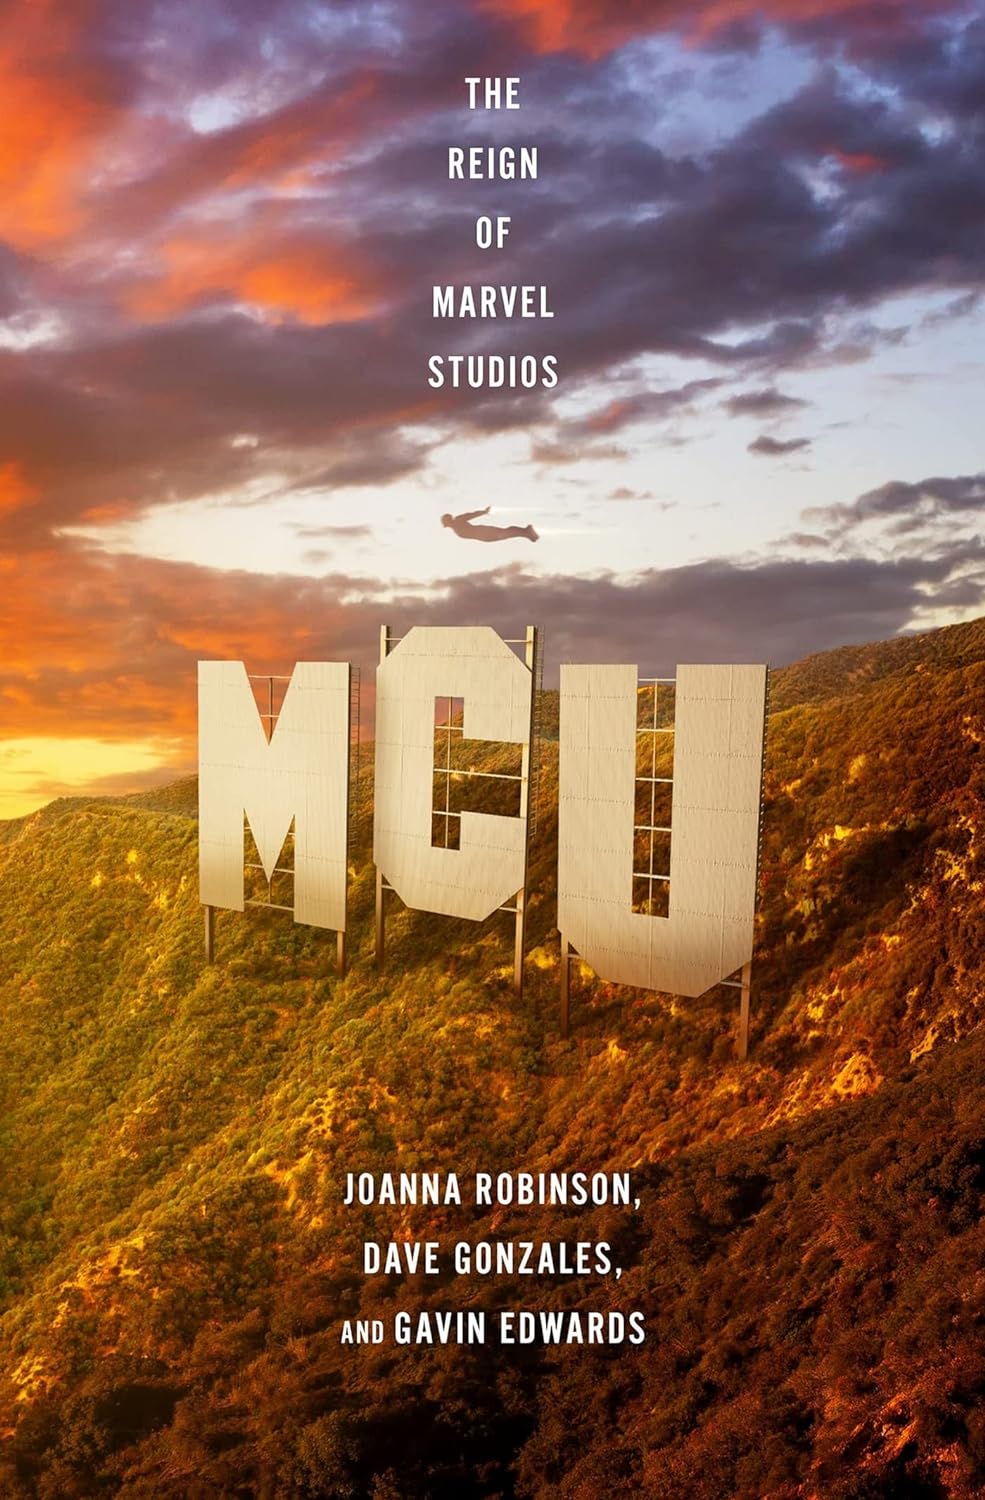 Today Only! Grab the Hottest Deals - MCU: The Reign of Marvel Studios - Save 28%!